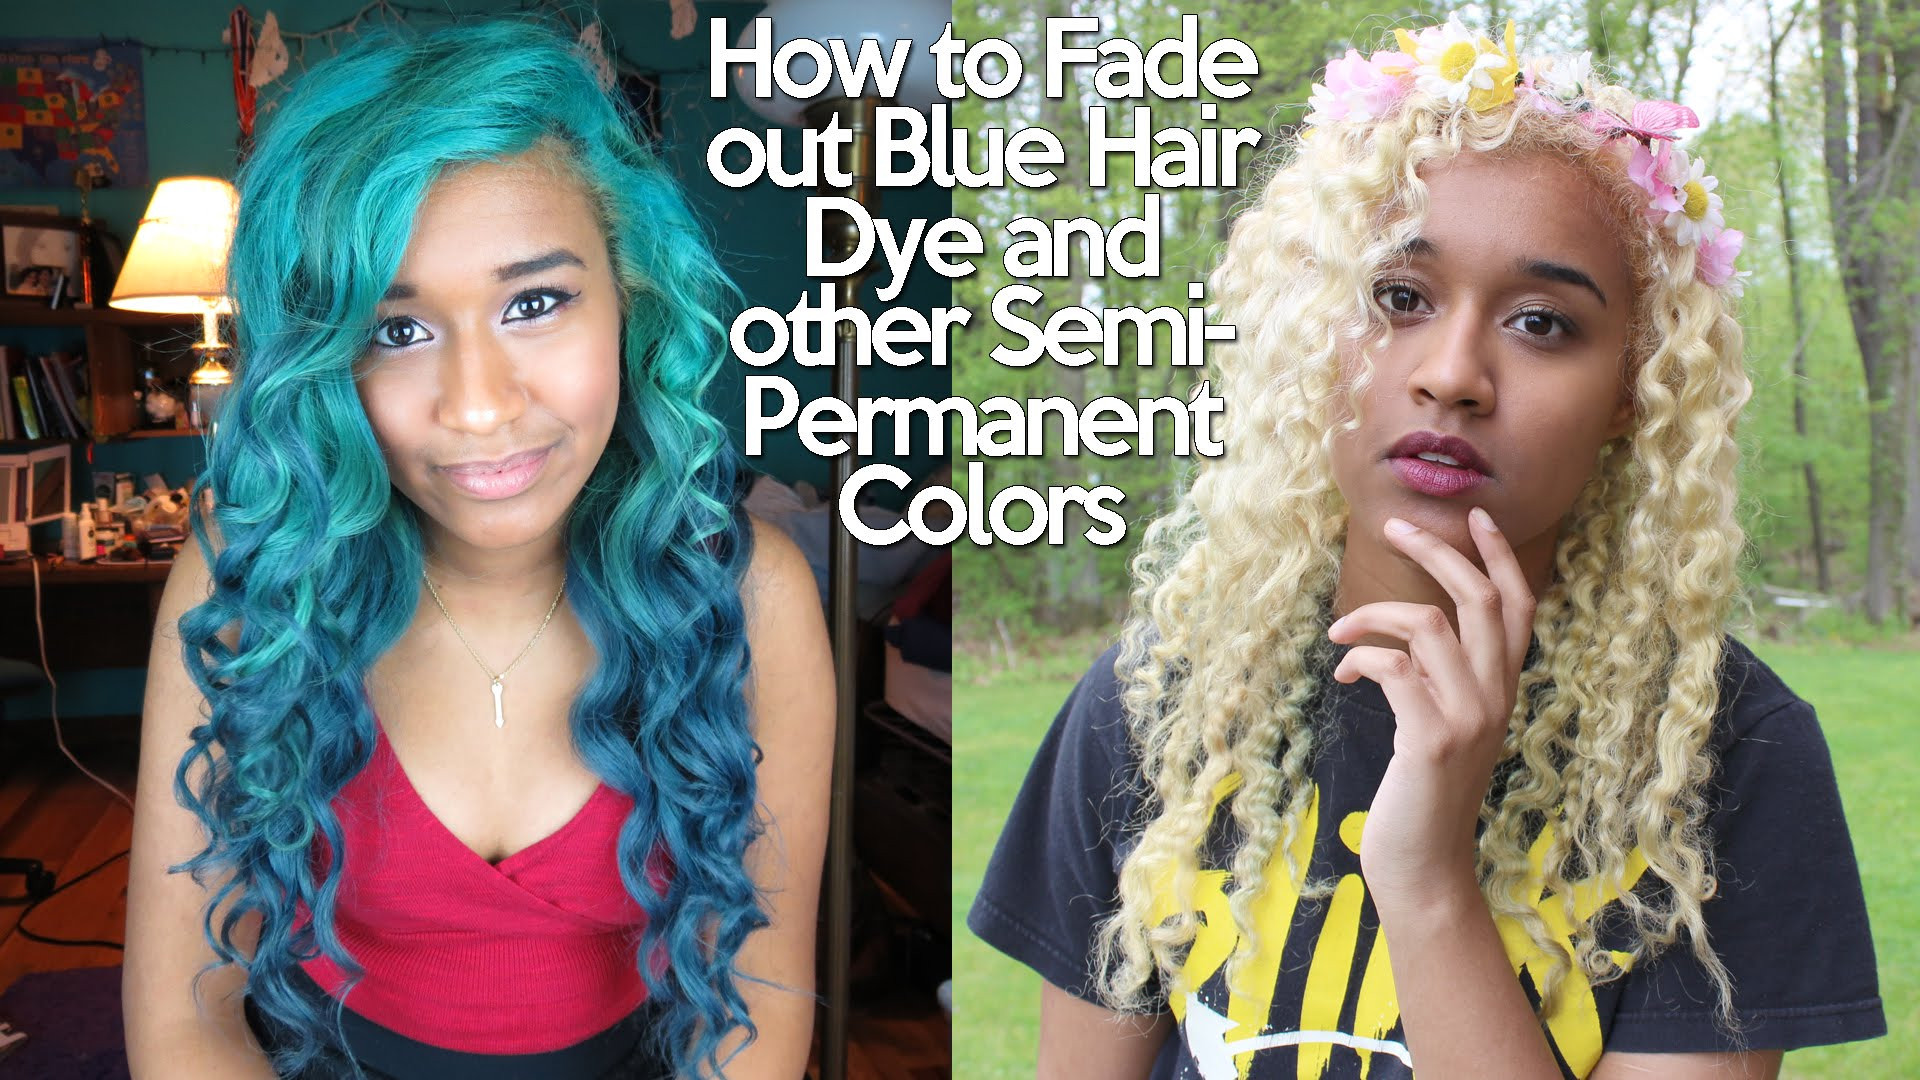 DIY Permanent Hair Dye
 How to Remove Semi Permanent Hair Dye from your Hair